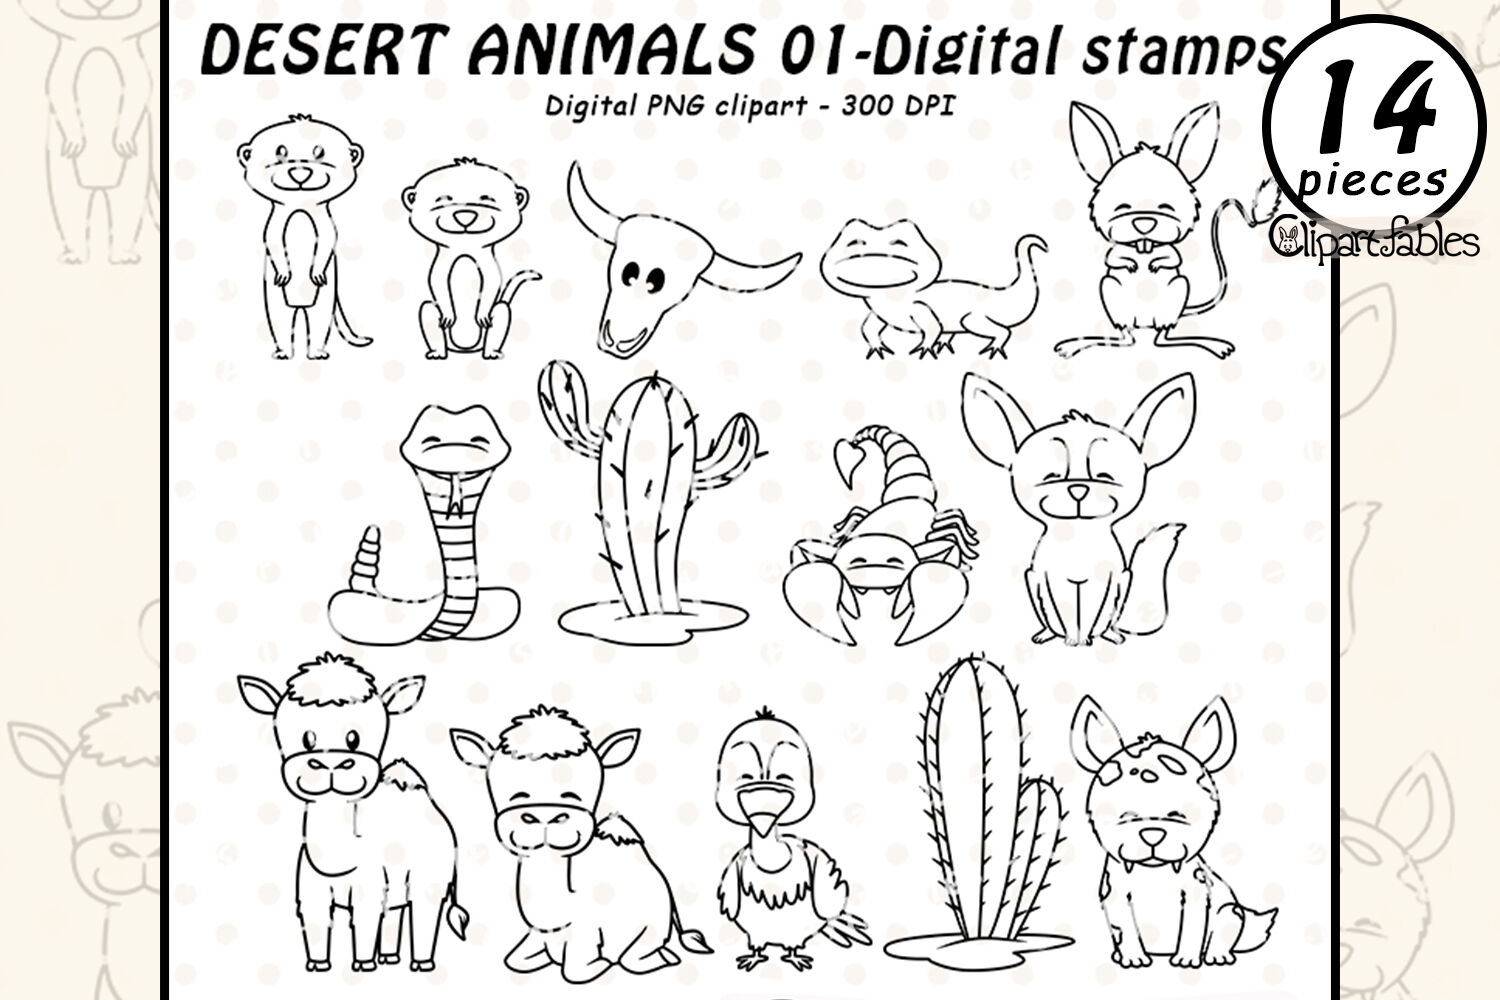 Cute DESERT ANIMALS digital stamps By clipartfables | TheHungryJPEG